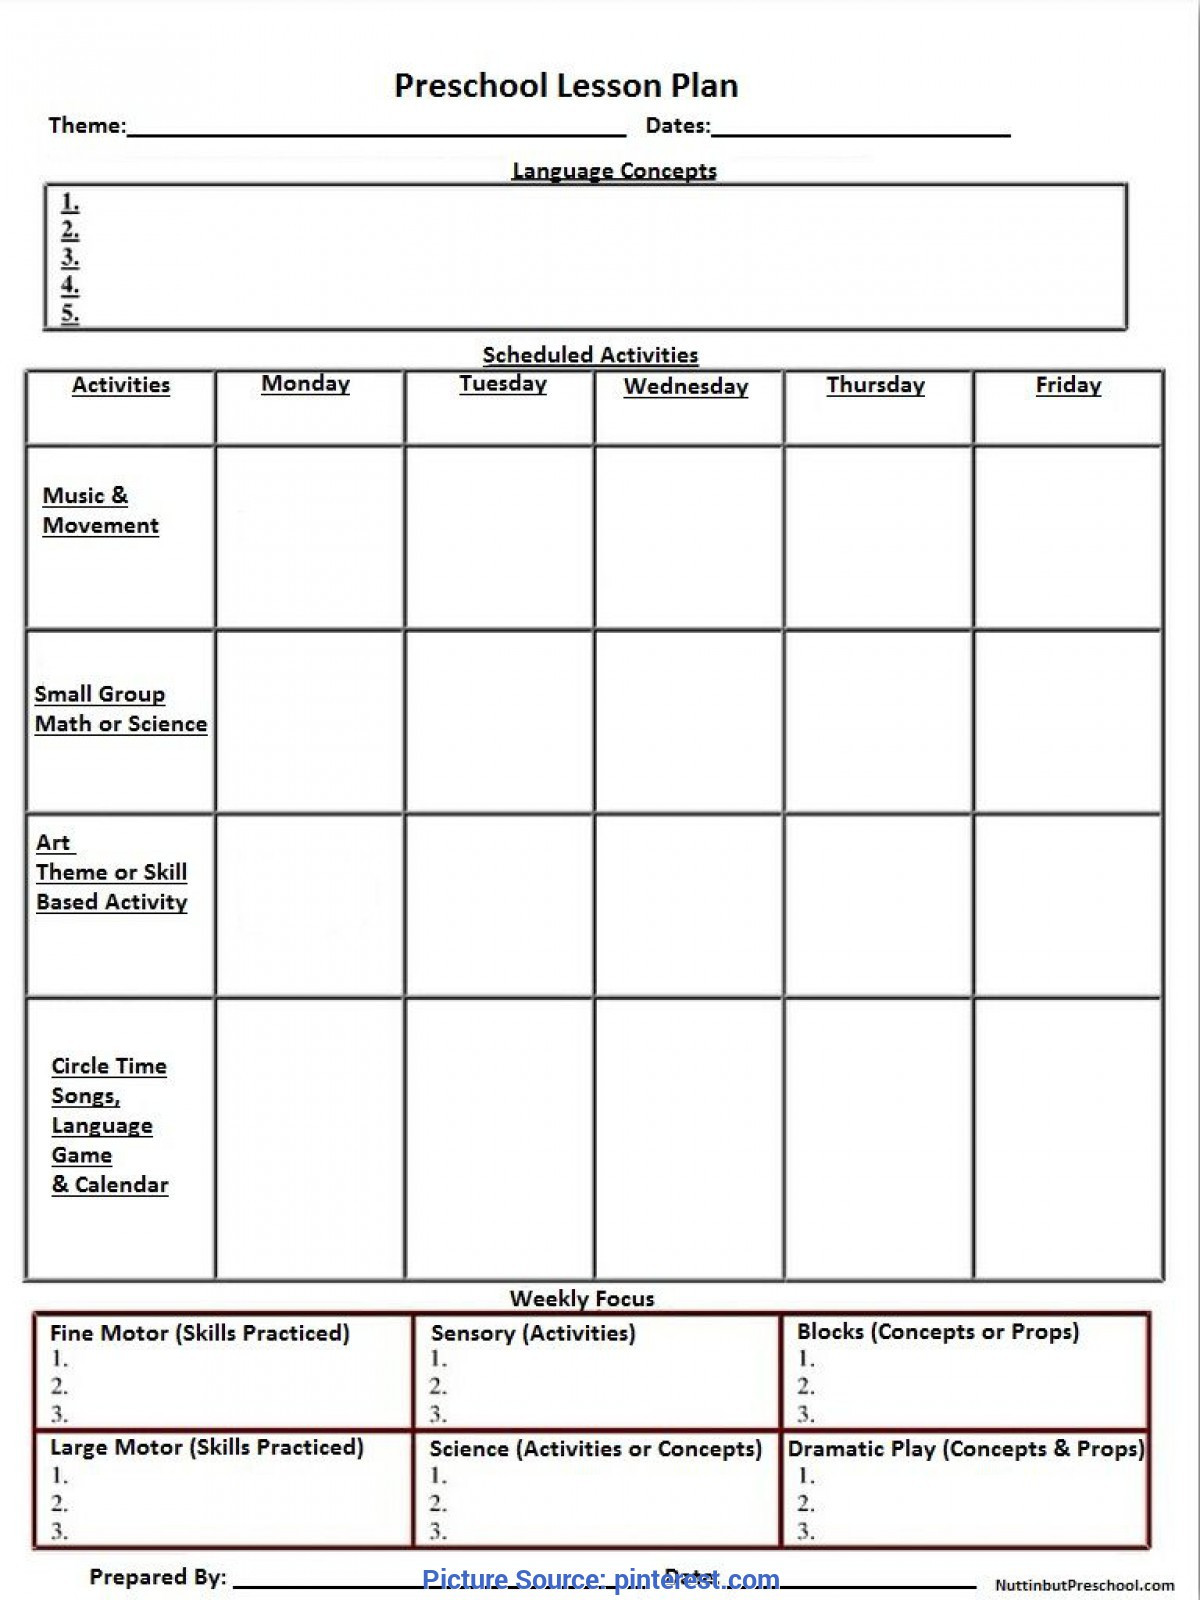 Free Lesson Plans Business Plan Template for Child Care Center toddler